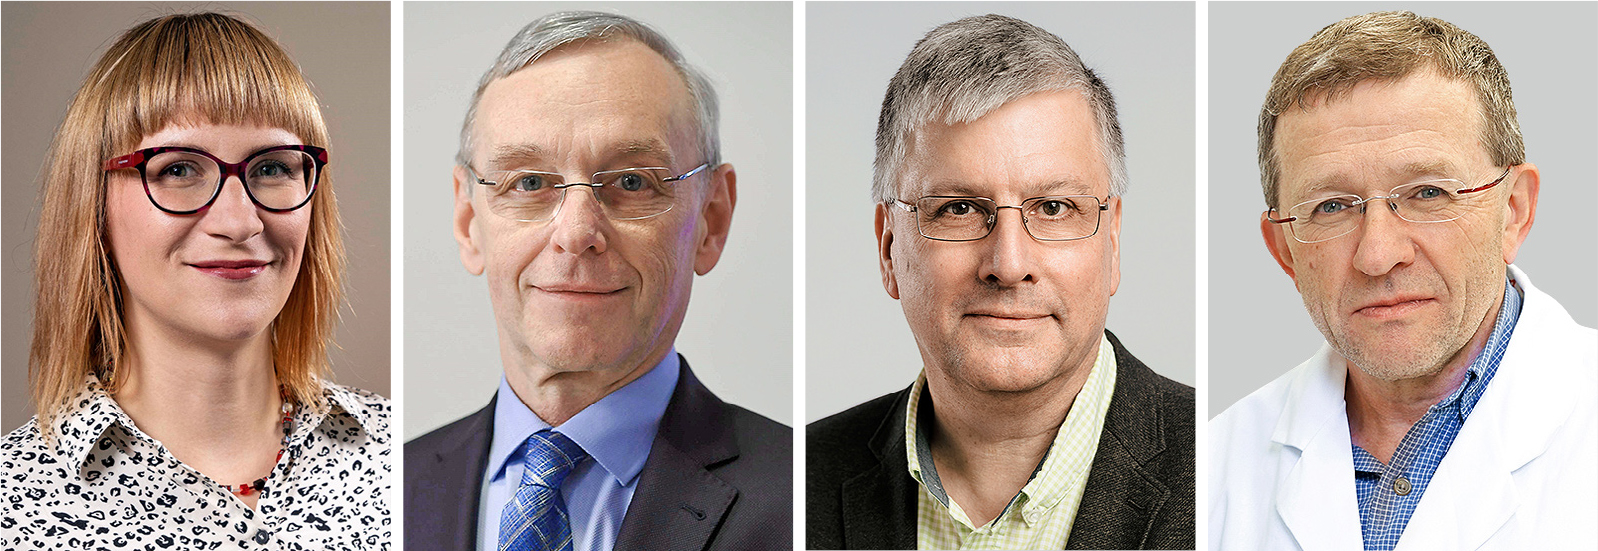 EMBL-HCEMM Partnership Fostering Excellence in Science